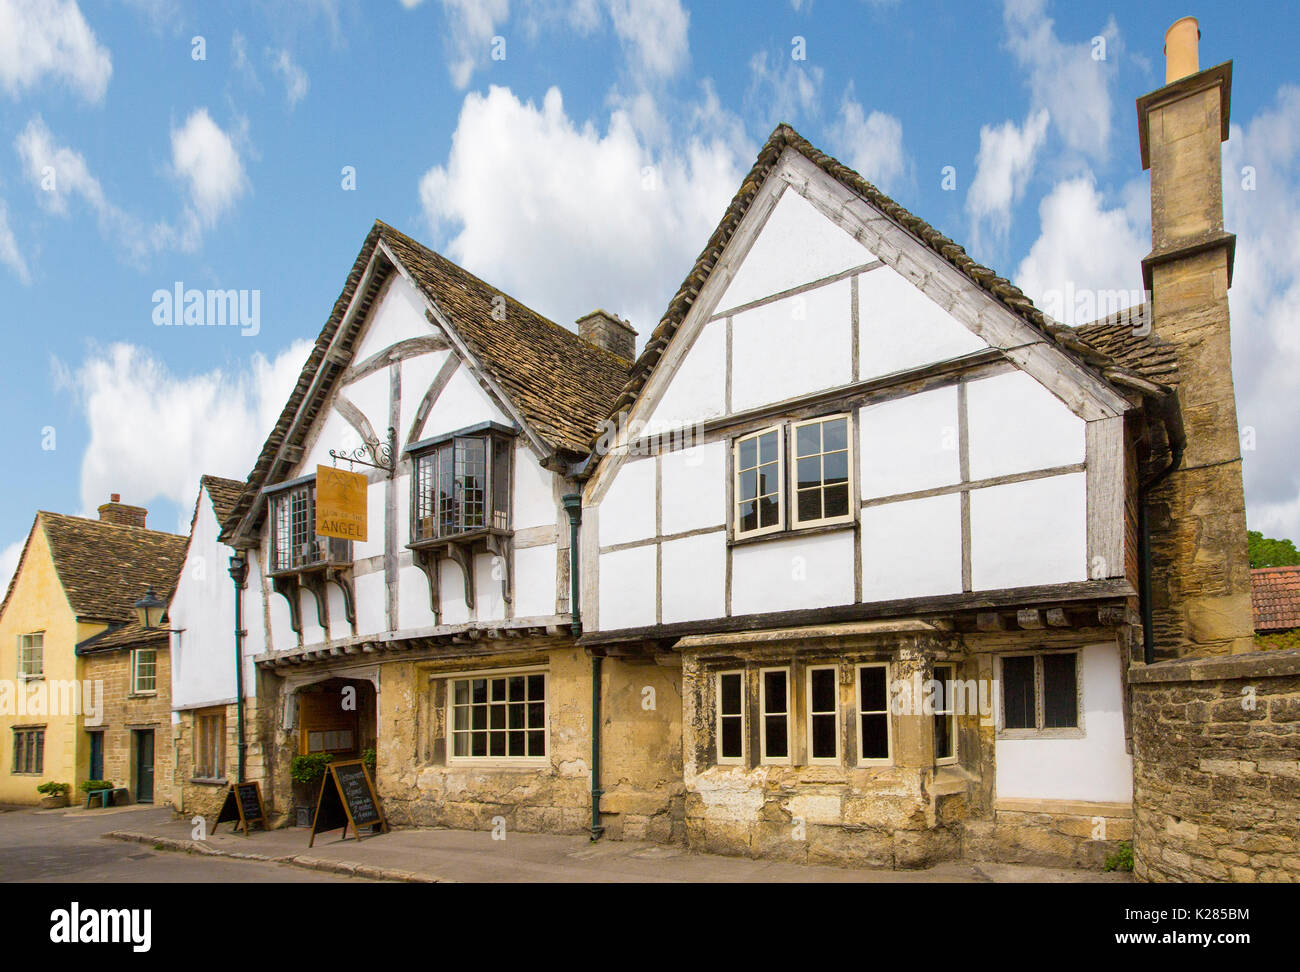 Historic house under blue sky in village of Lacock, Wiltshire, England Stock Photo